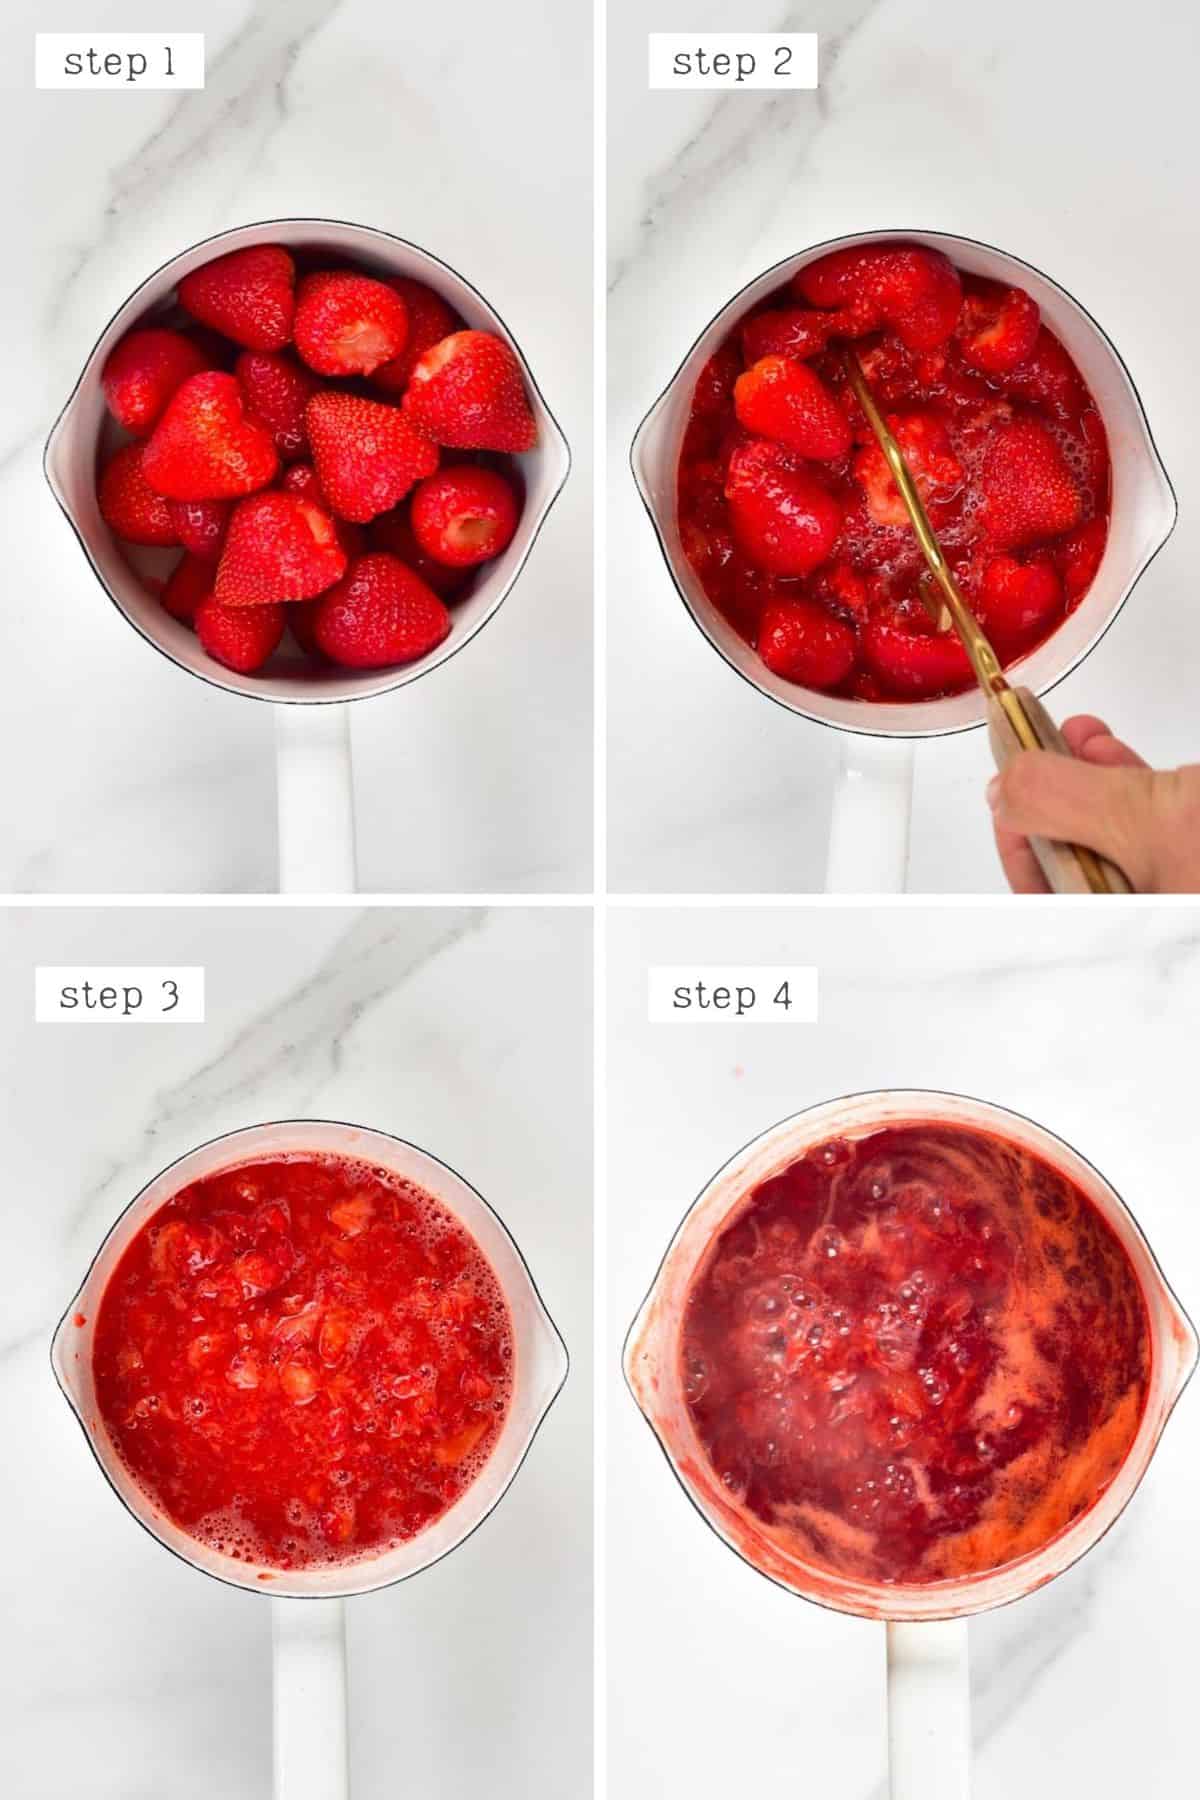 Steps to making strawberry syrup